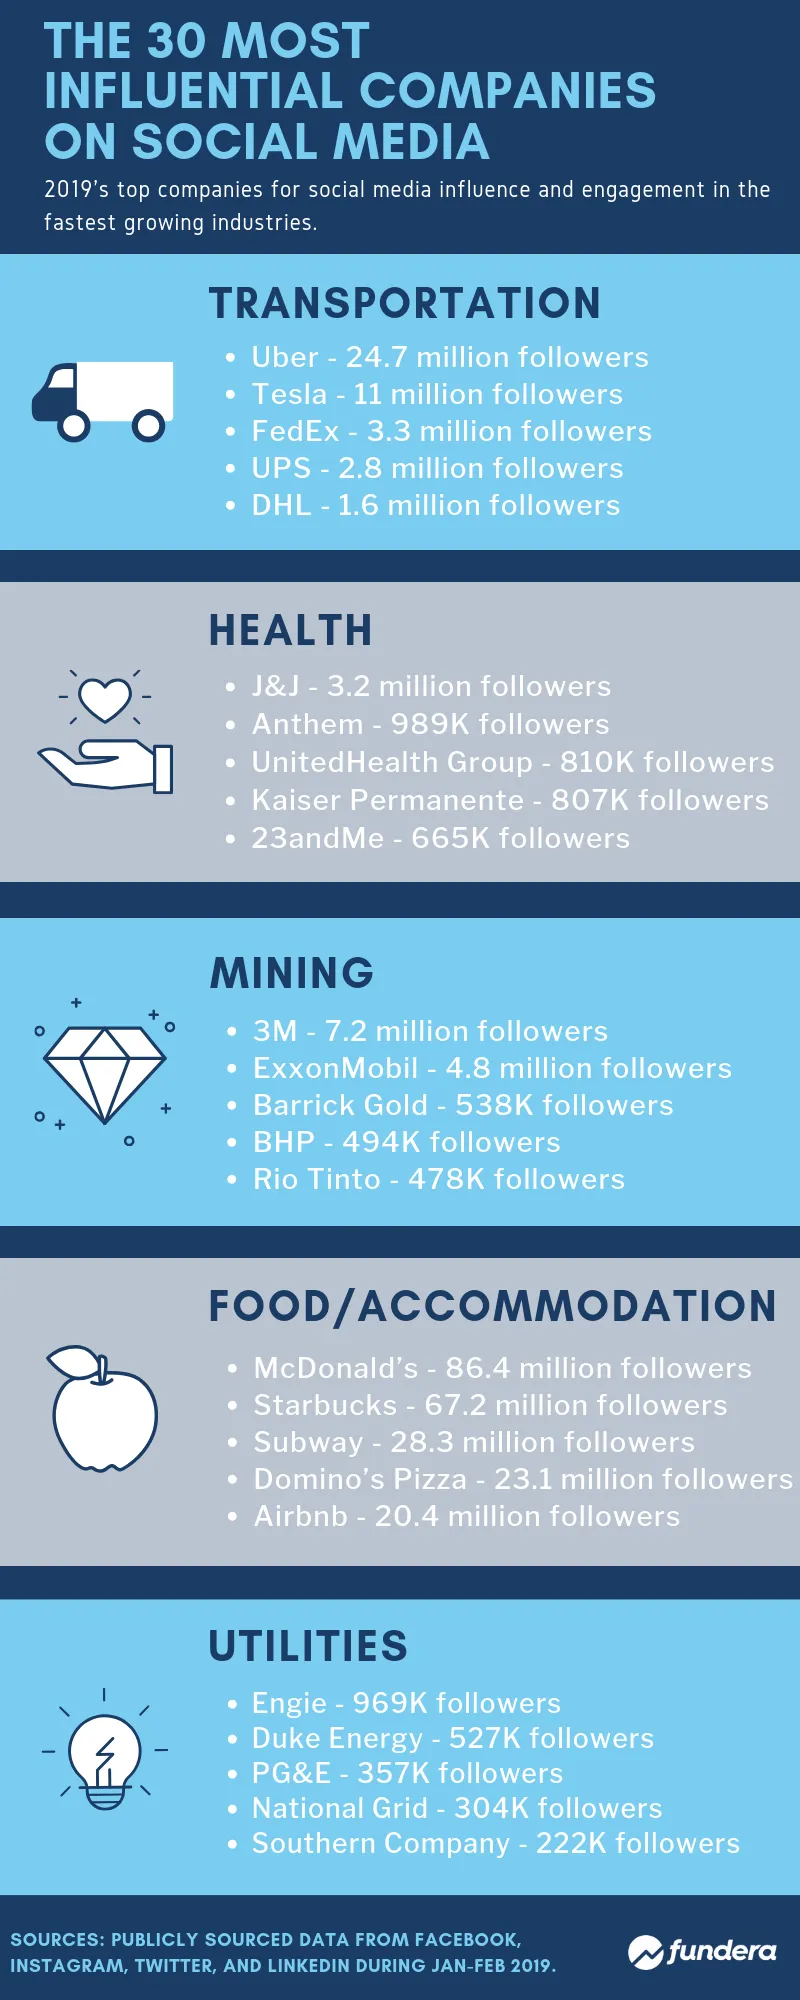 The 30 Most Influential Companies on Social Media in 2019 - infographic